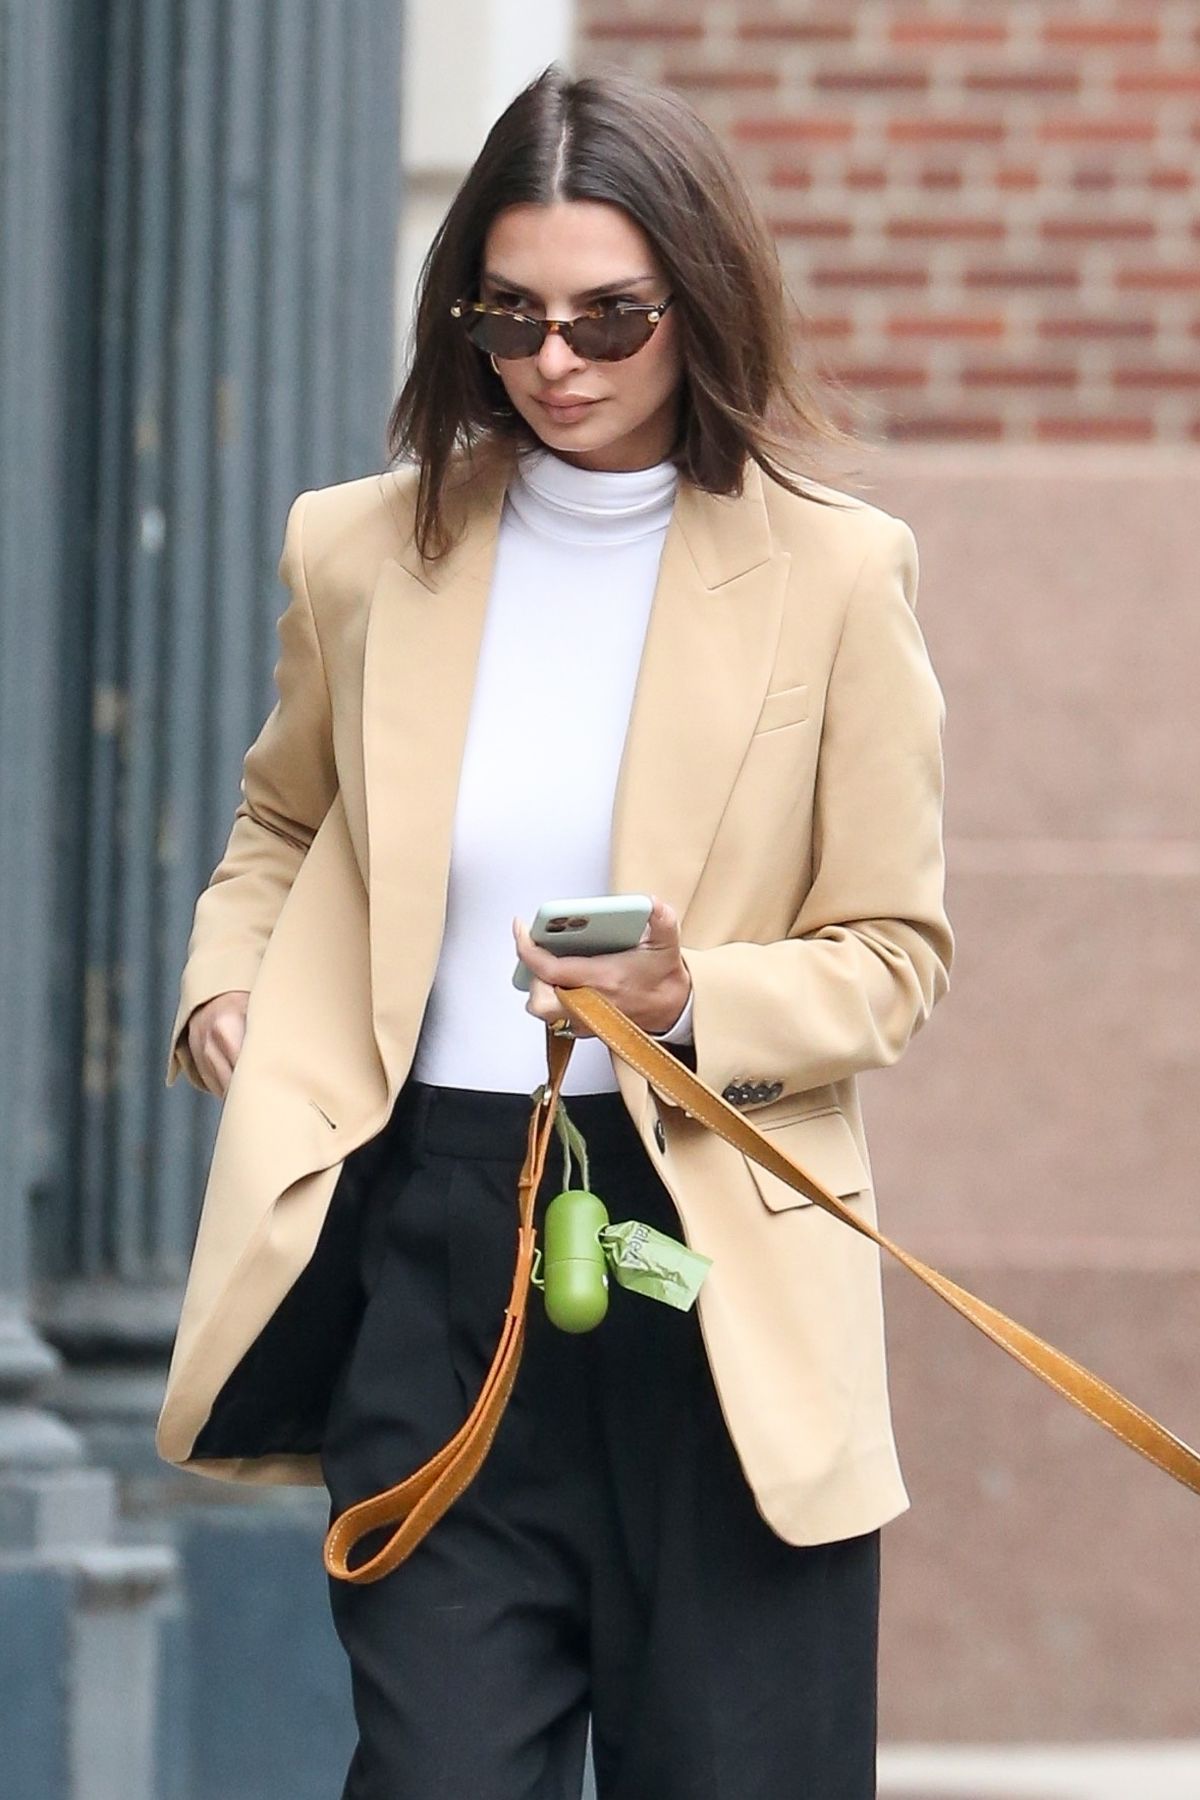 EMILY RATAJKOWSKI in Givenchy Wool Blazer Out with Her Dog in New York ...